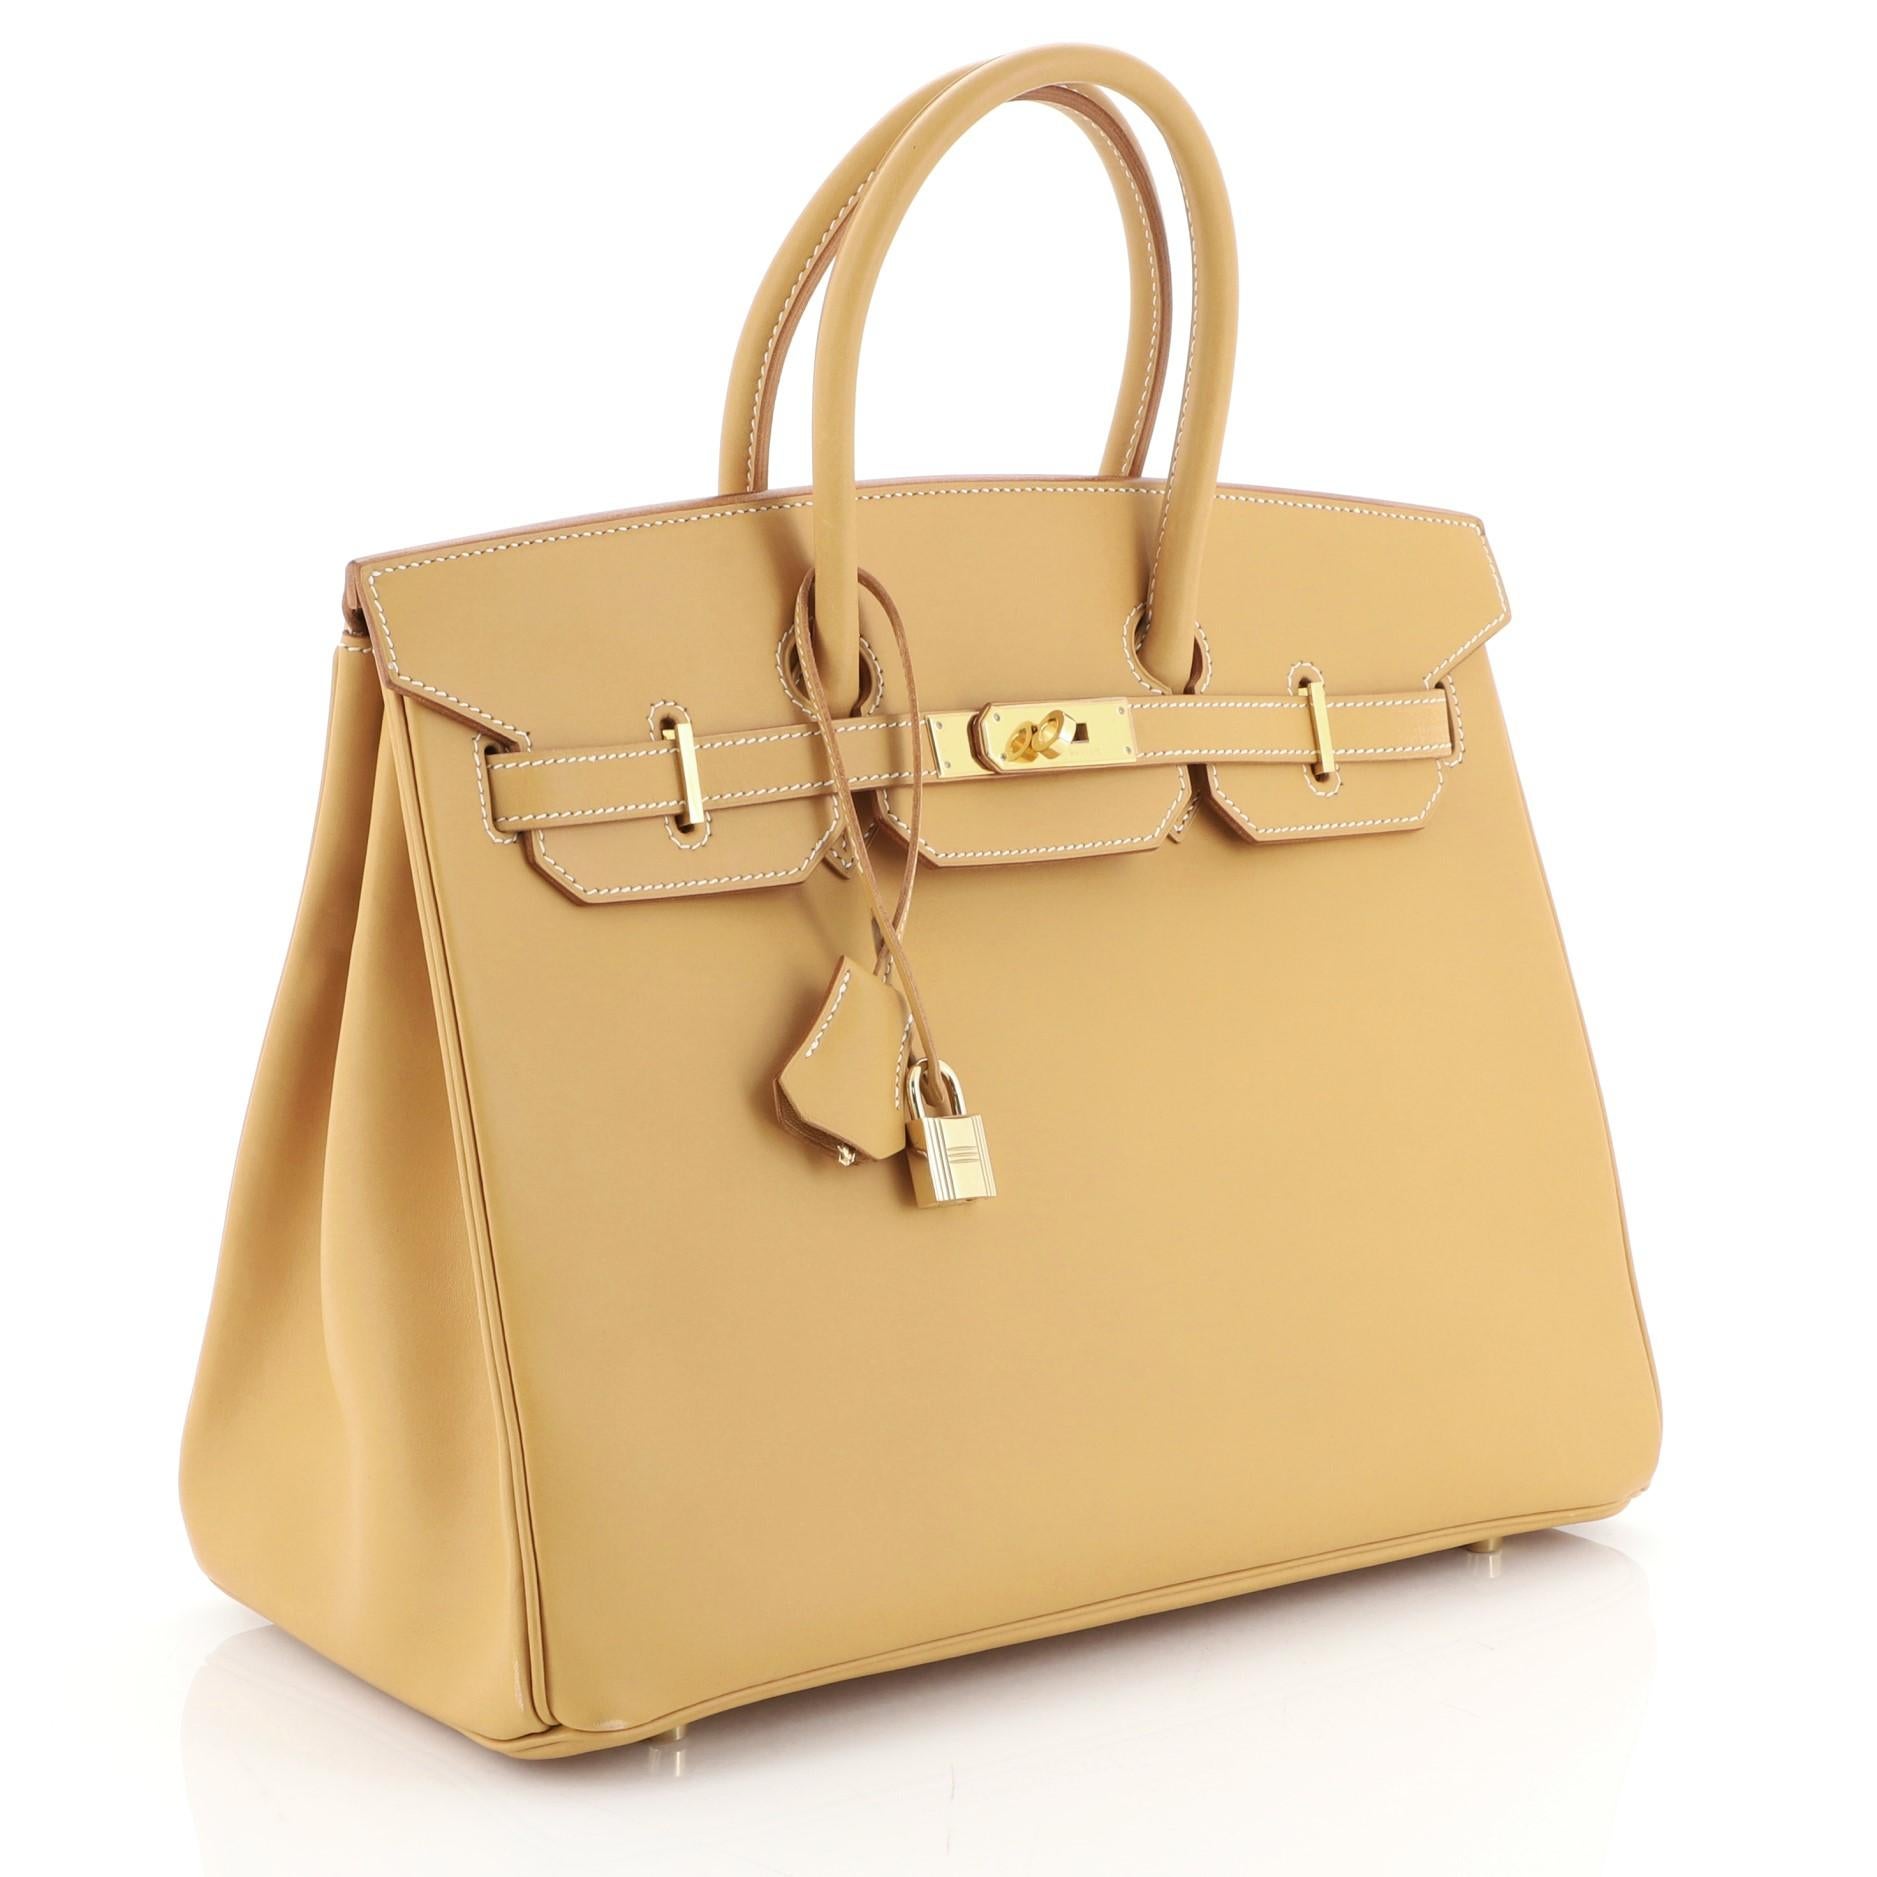 This Hermes Birkin Handbag Brown Vache Natural with Gold Hardware 35, crafted in Natural neutral Vache Natural leather, features dual rolled handles, frontal flap, and gold hardware. Its turn-lock closure opens to a Natural neutral Chevre leather